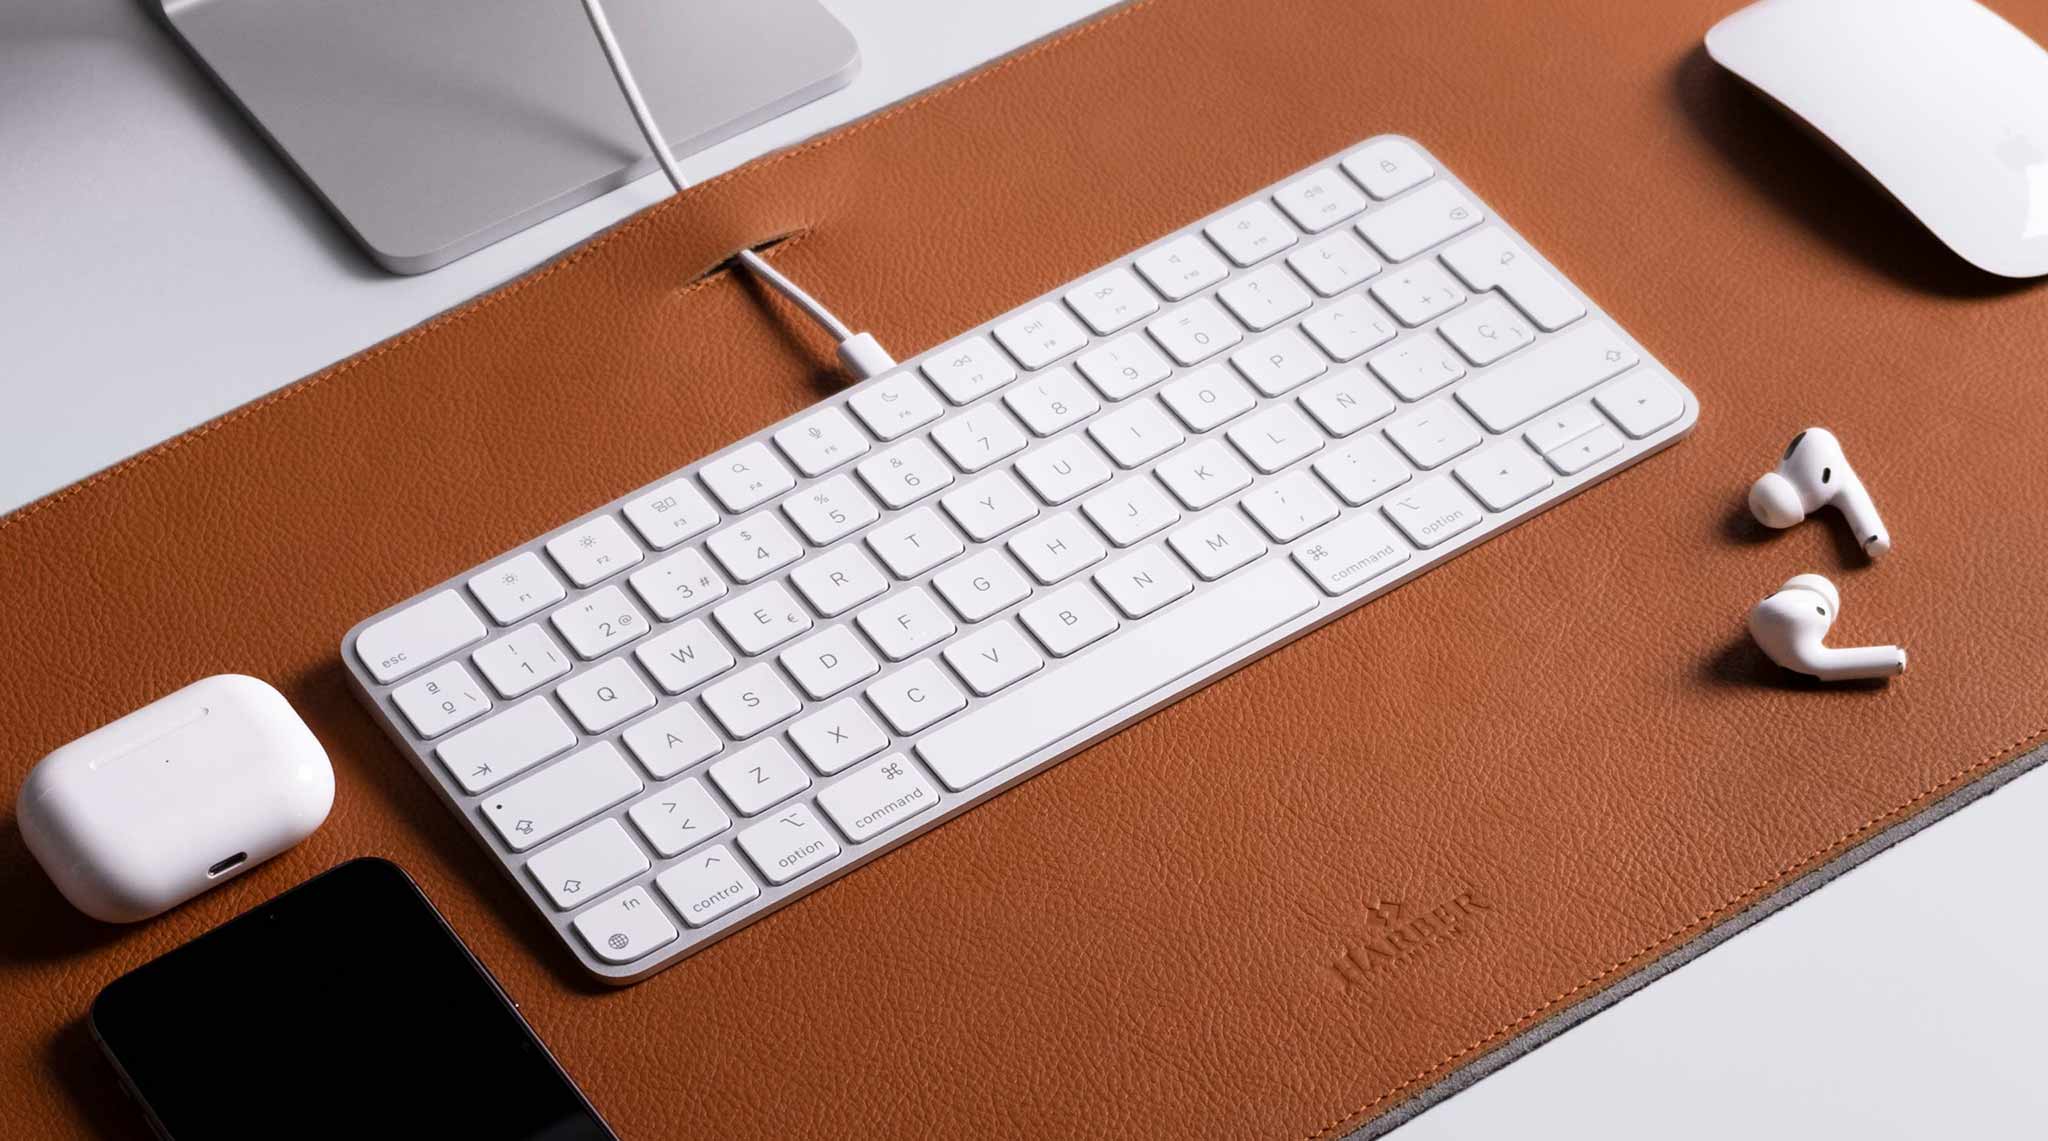 Apple keyboard over a Premium Leather Desk Mat 